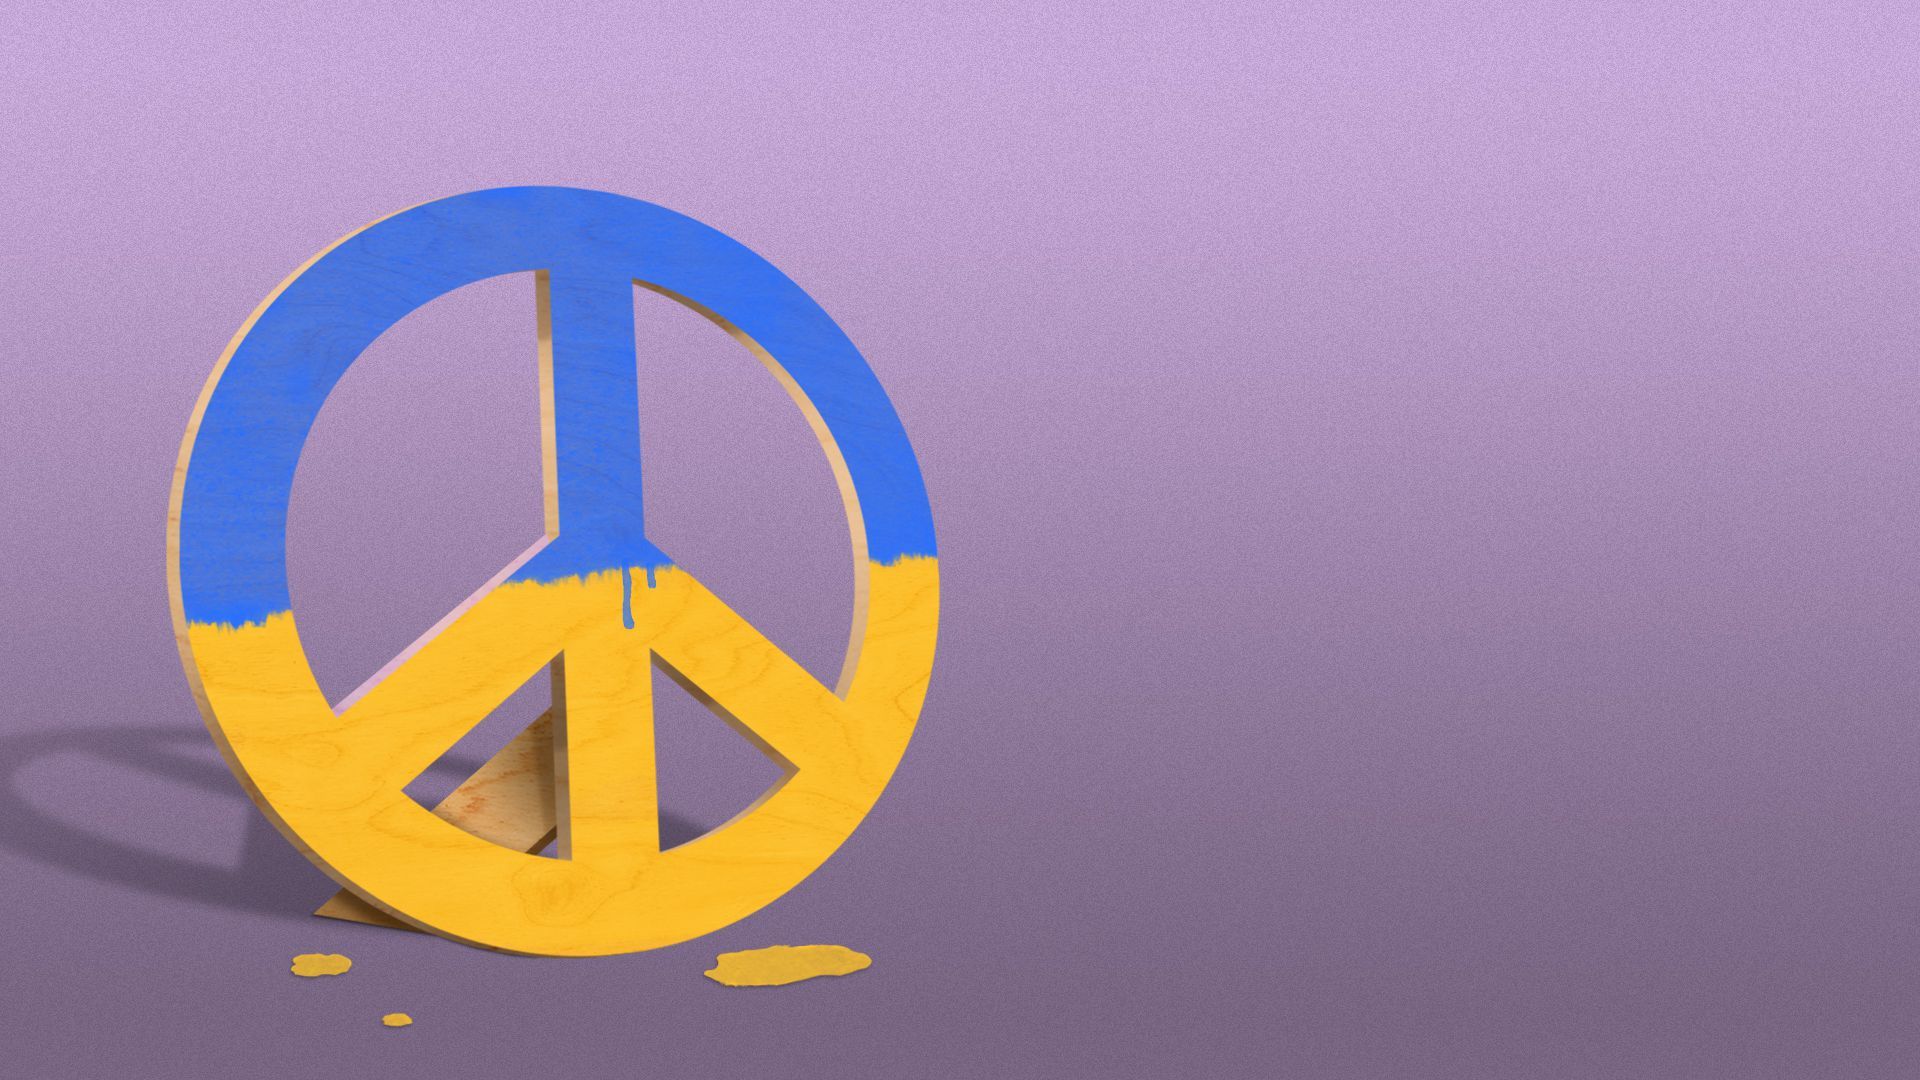 Illustration of peace sign painted with the Ukrainian flag colors as a wooden prop